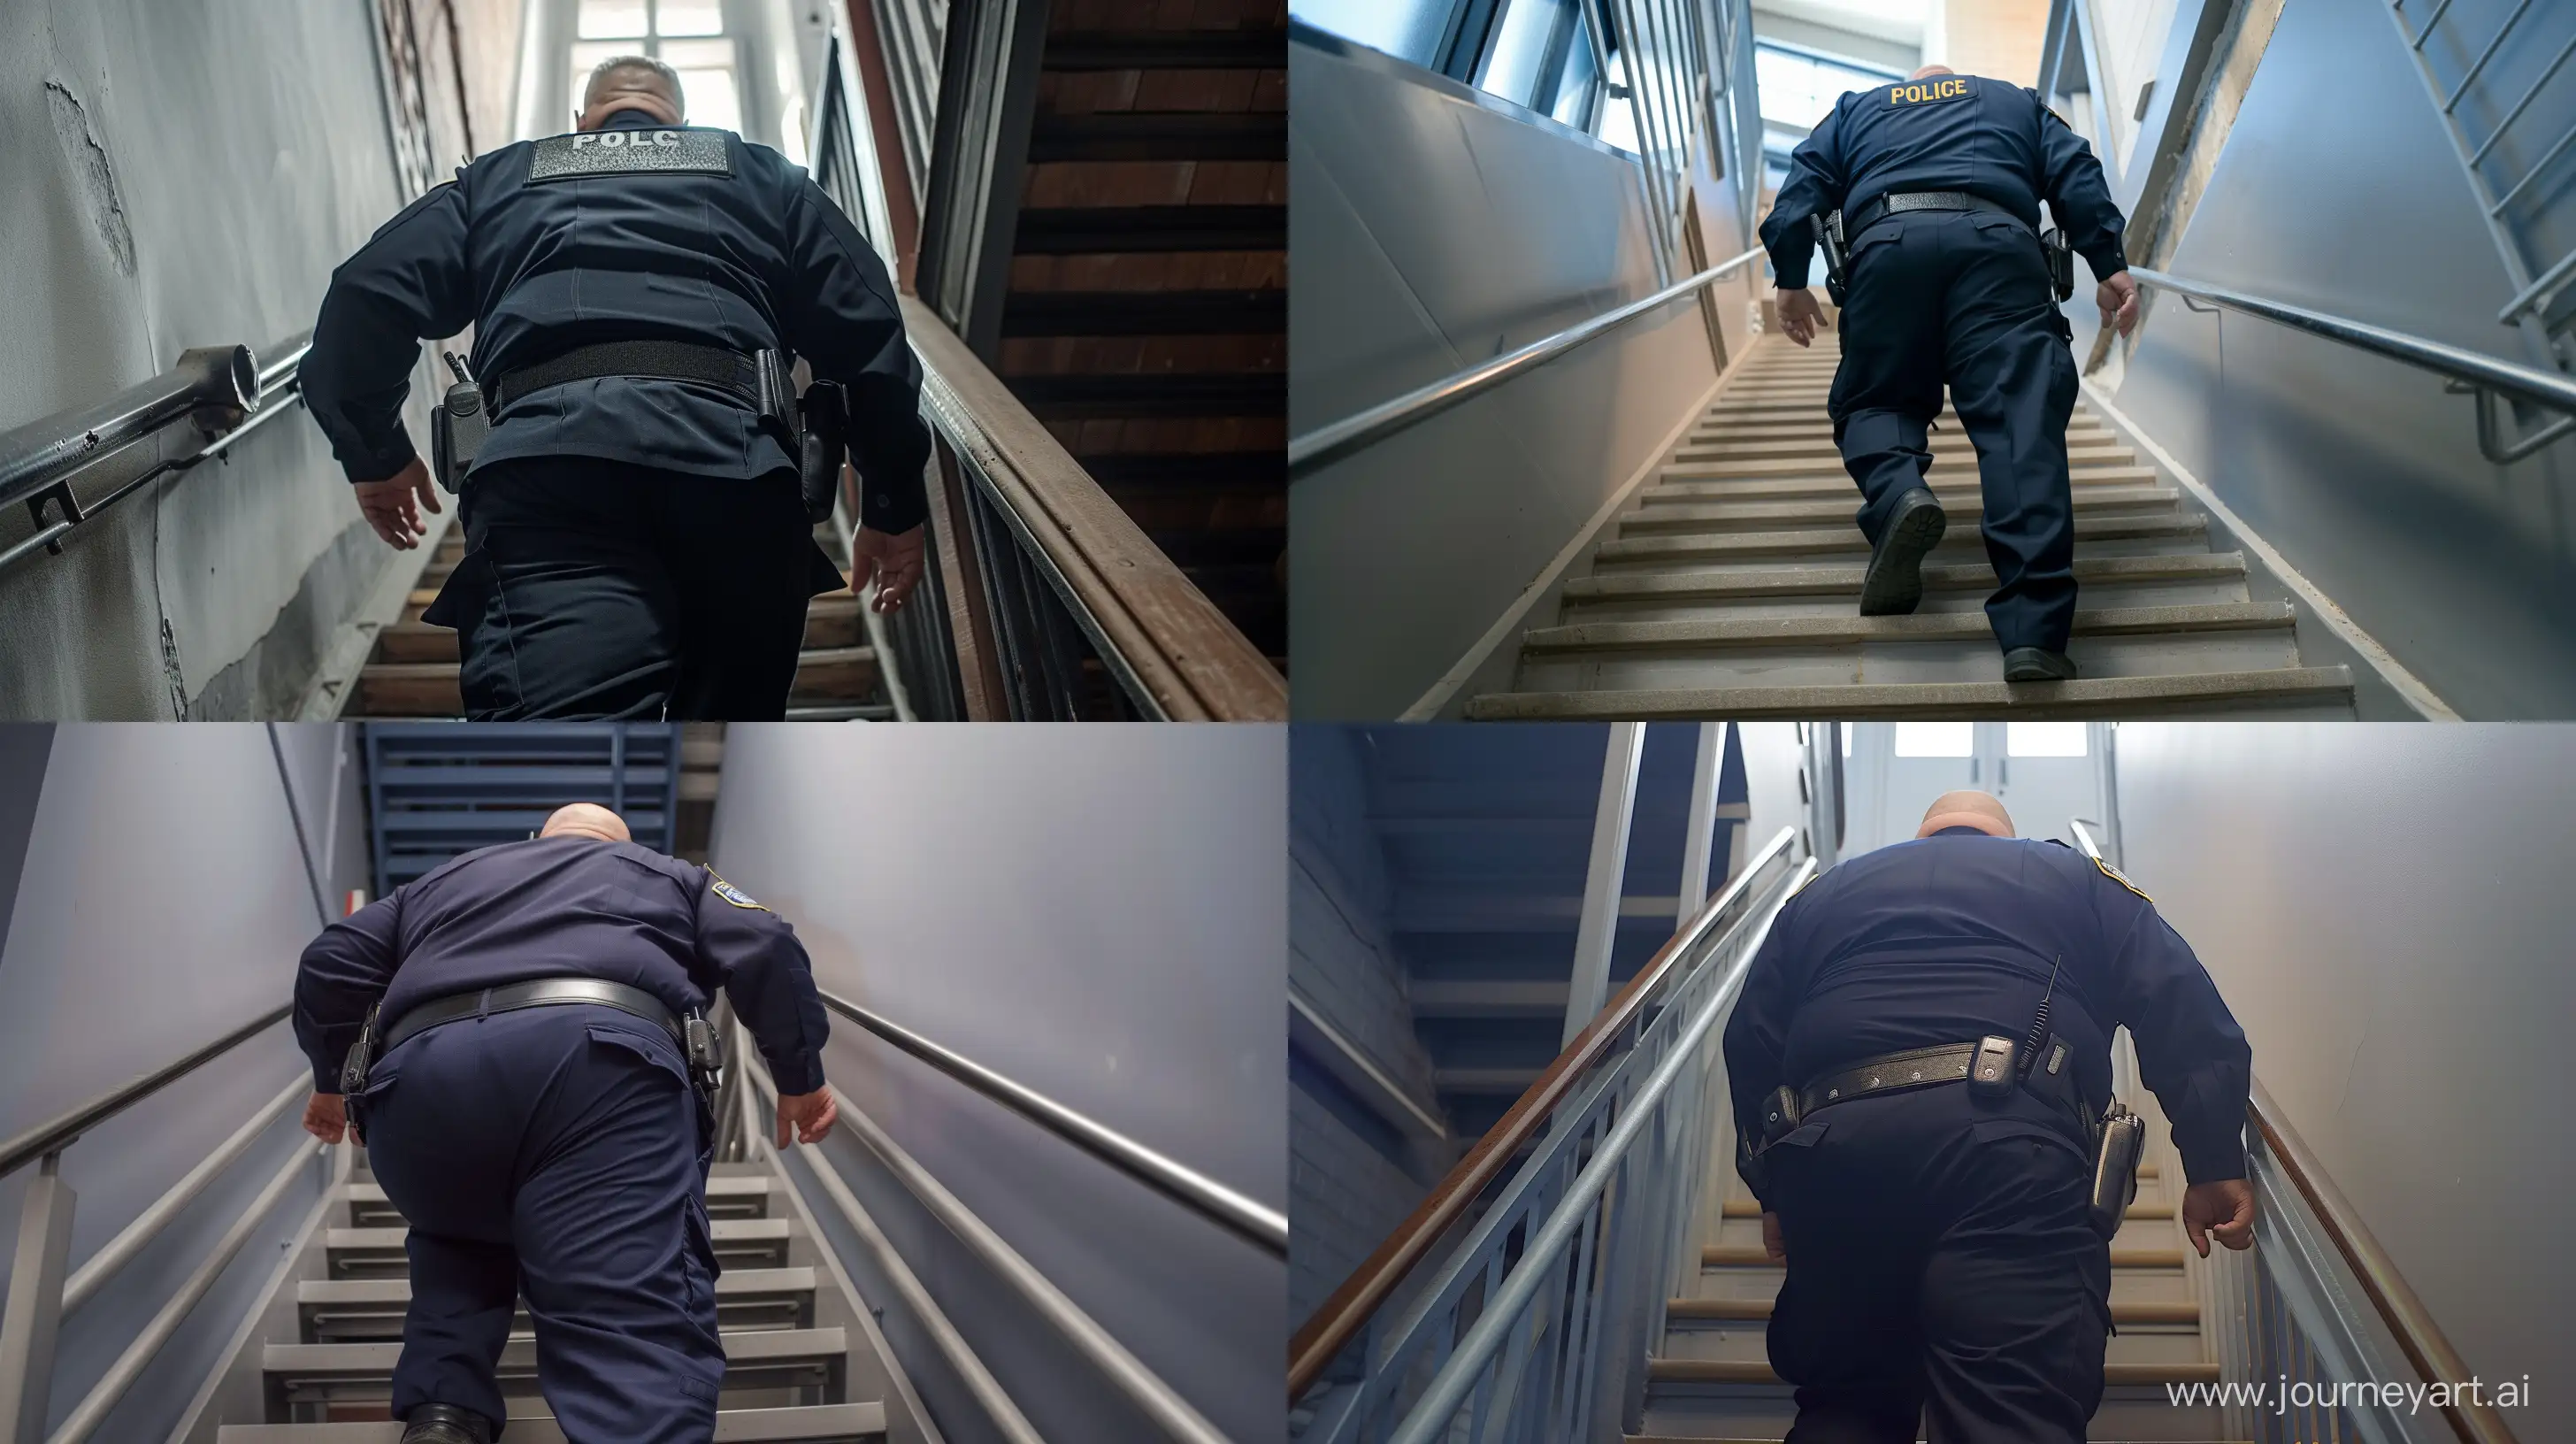 Back view low-angle short photo of a fat man aged 60 wearing a slightly shiny navy police uniform. Climbing stairs. Inside. --style raw --ar 16:9